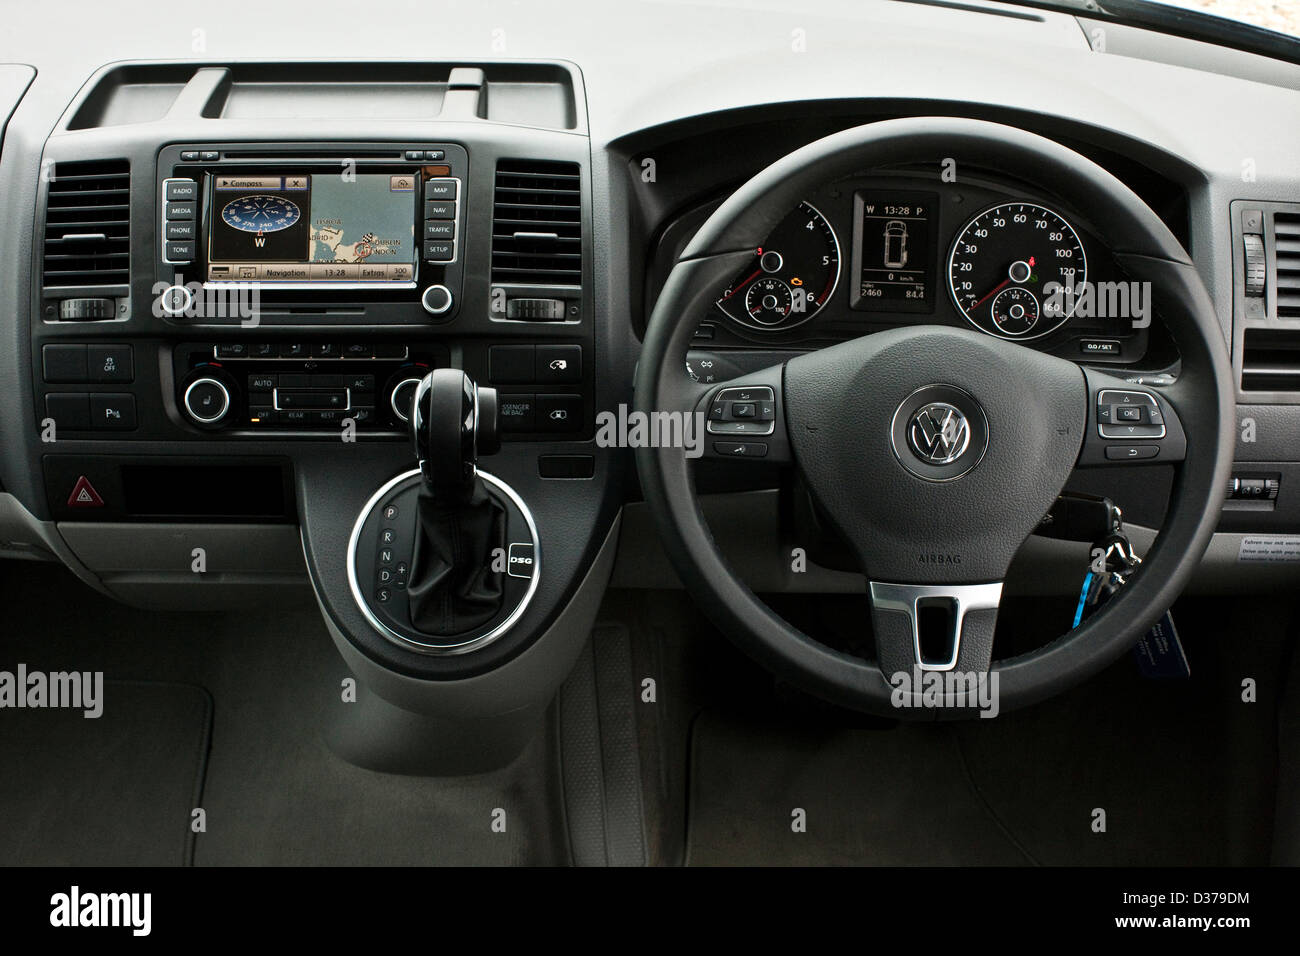 Drivers seat and steering wheel in the VW California campervan, Southampton, UK, 07 05 2010 Stock Photo